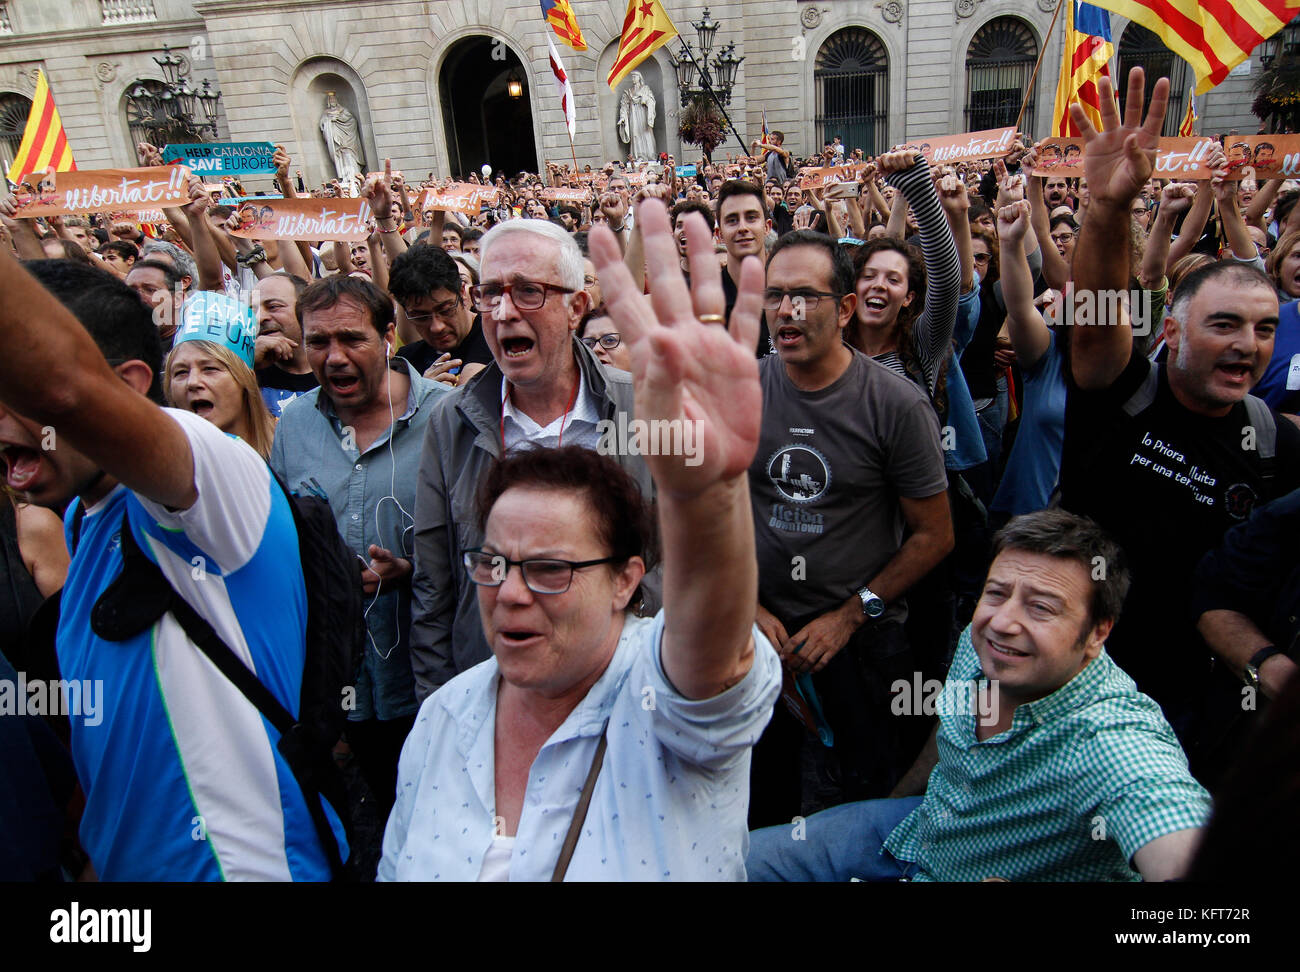 Thousands wave flags and celebrate in the streets of Barcelona on October 27, 2017, following the announcement that Catalonia declared independence fr Stock Photo